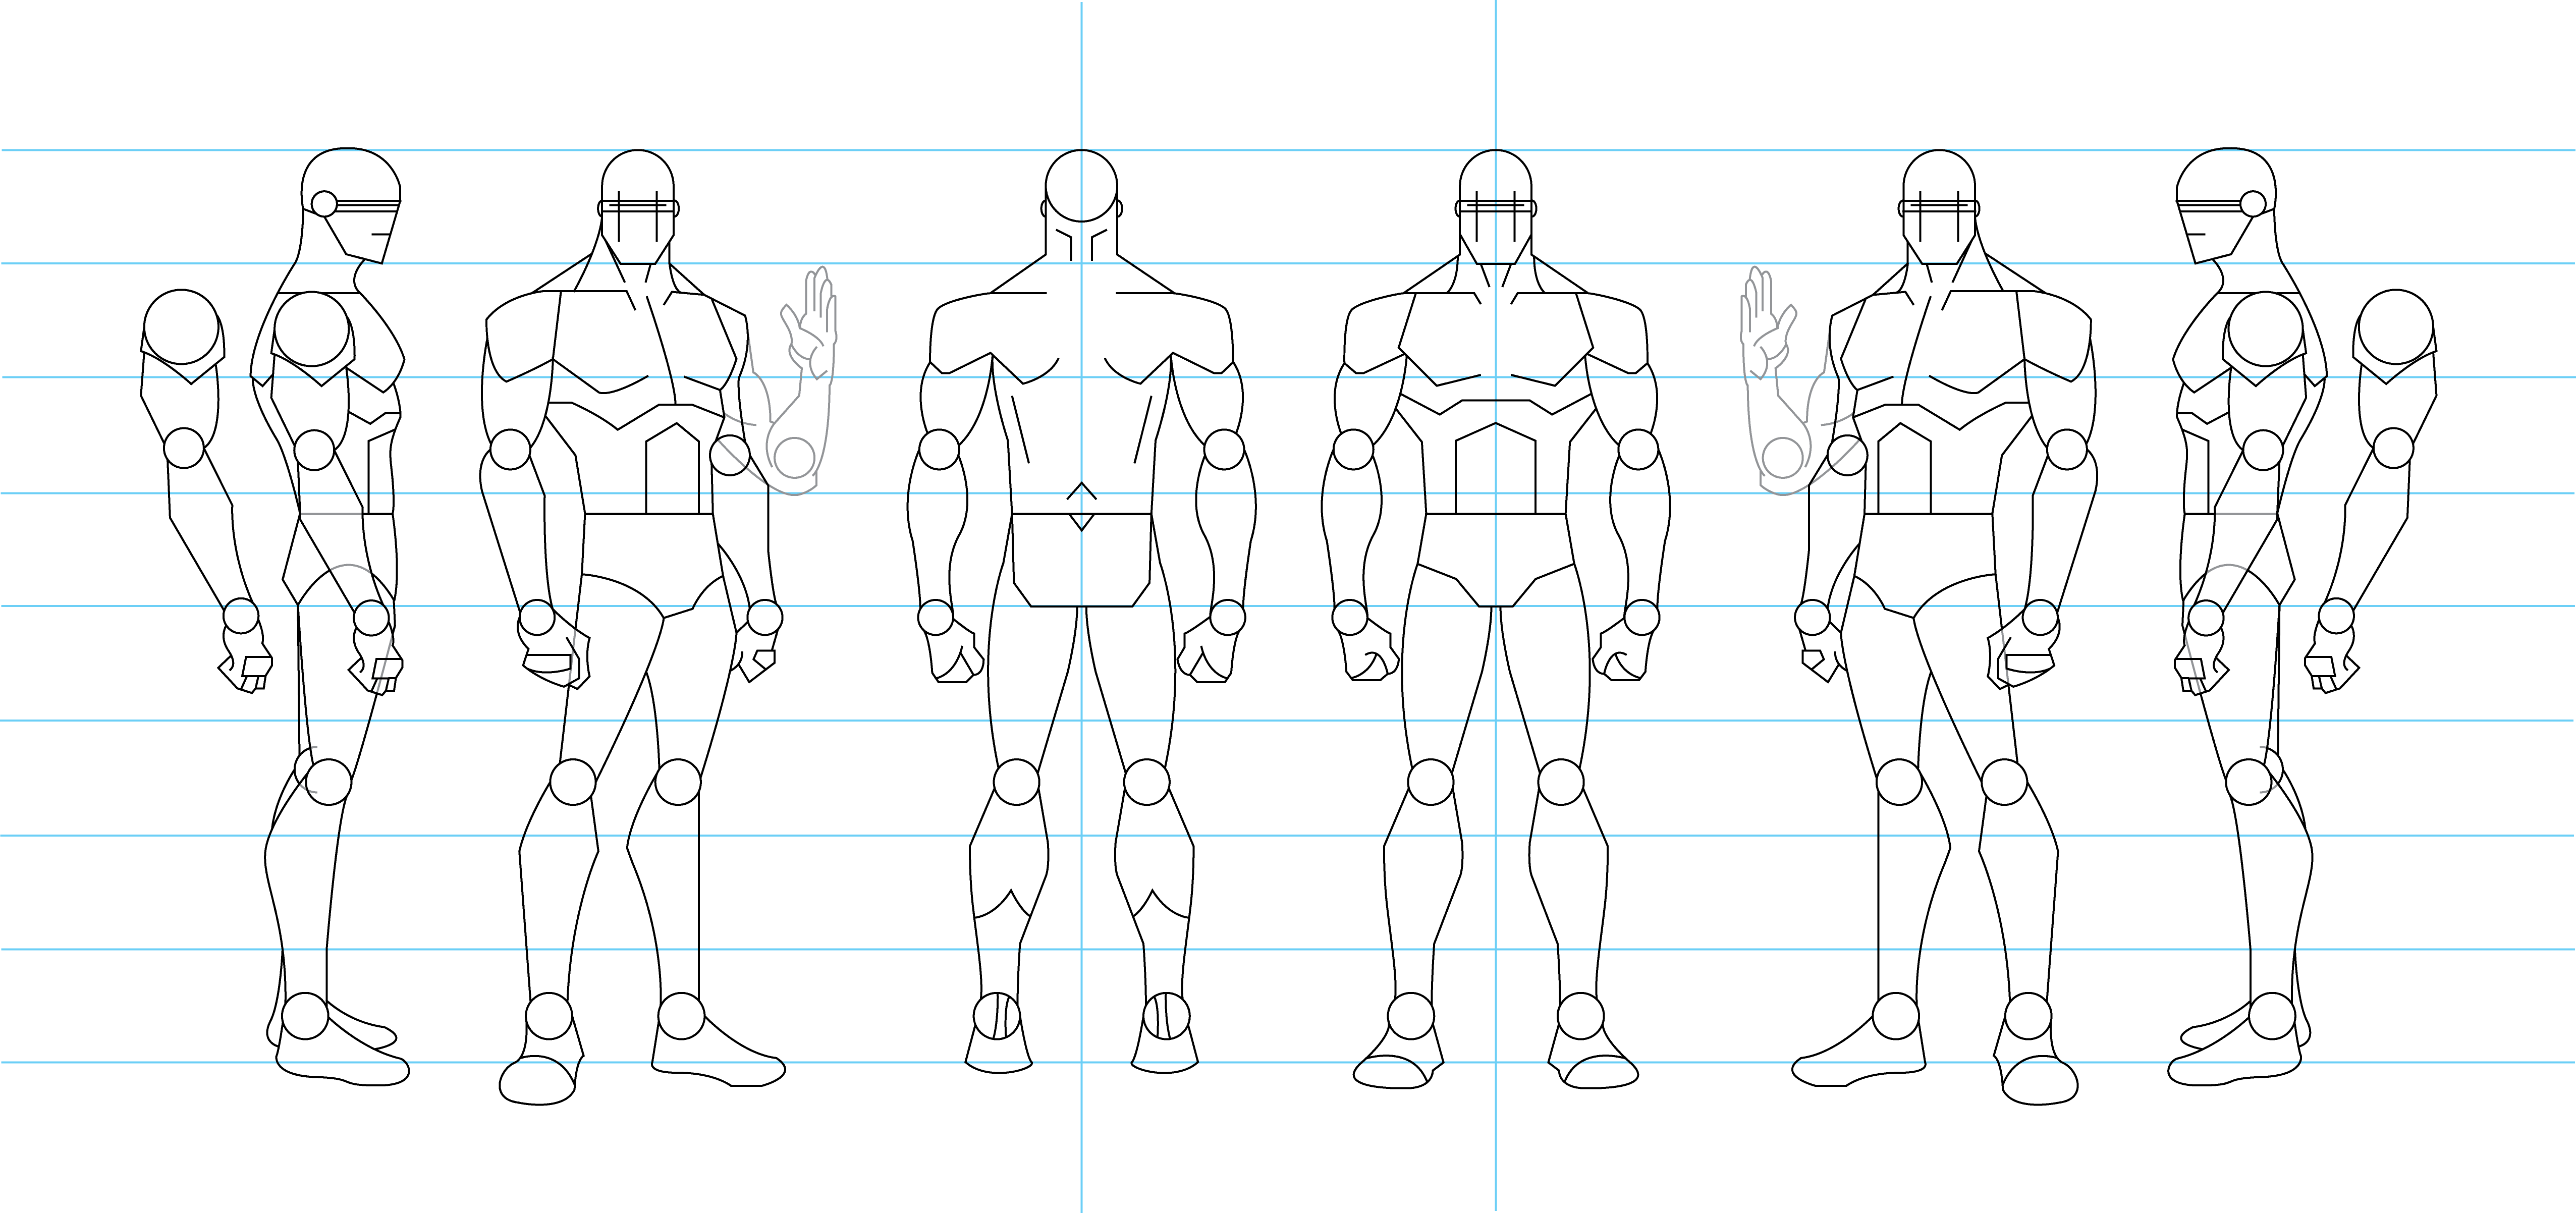 fedme alkohol Ældre Figure Drawing Turnaround Template - Male by tamm3r on DeviantArt